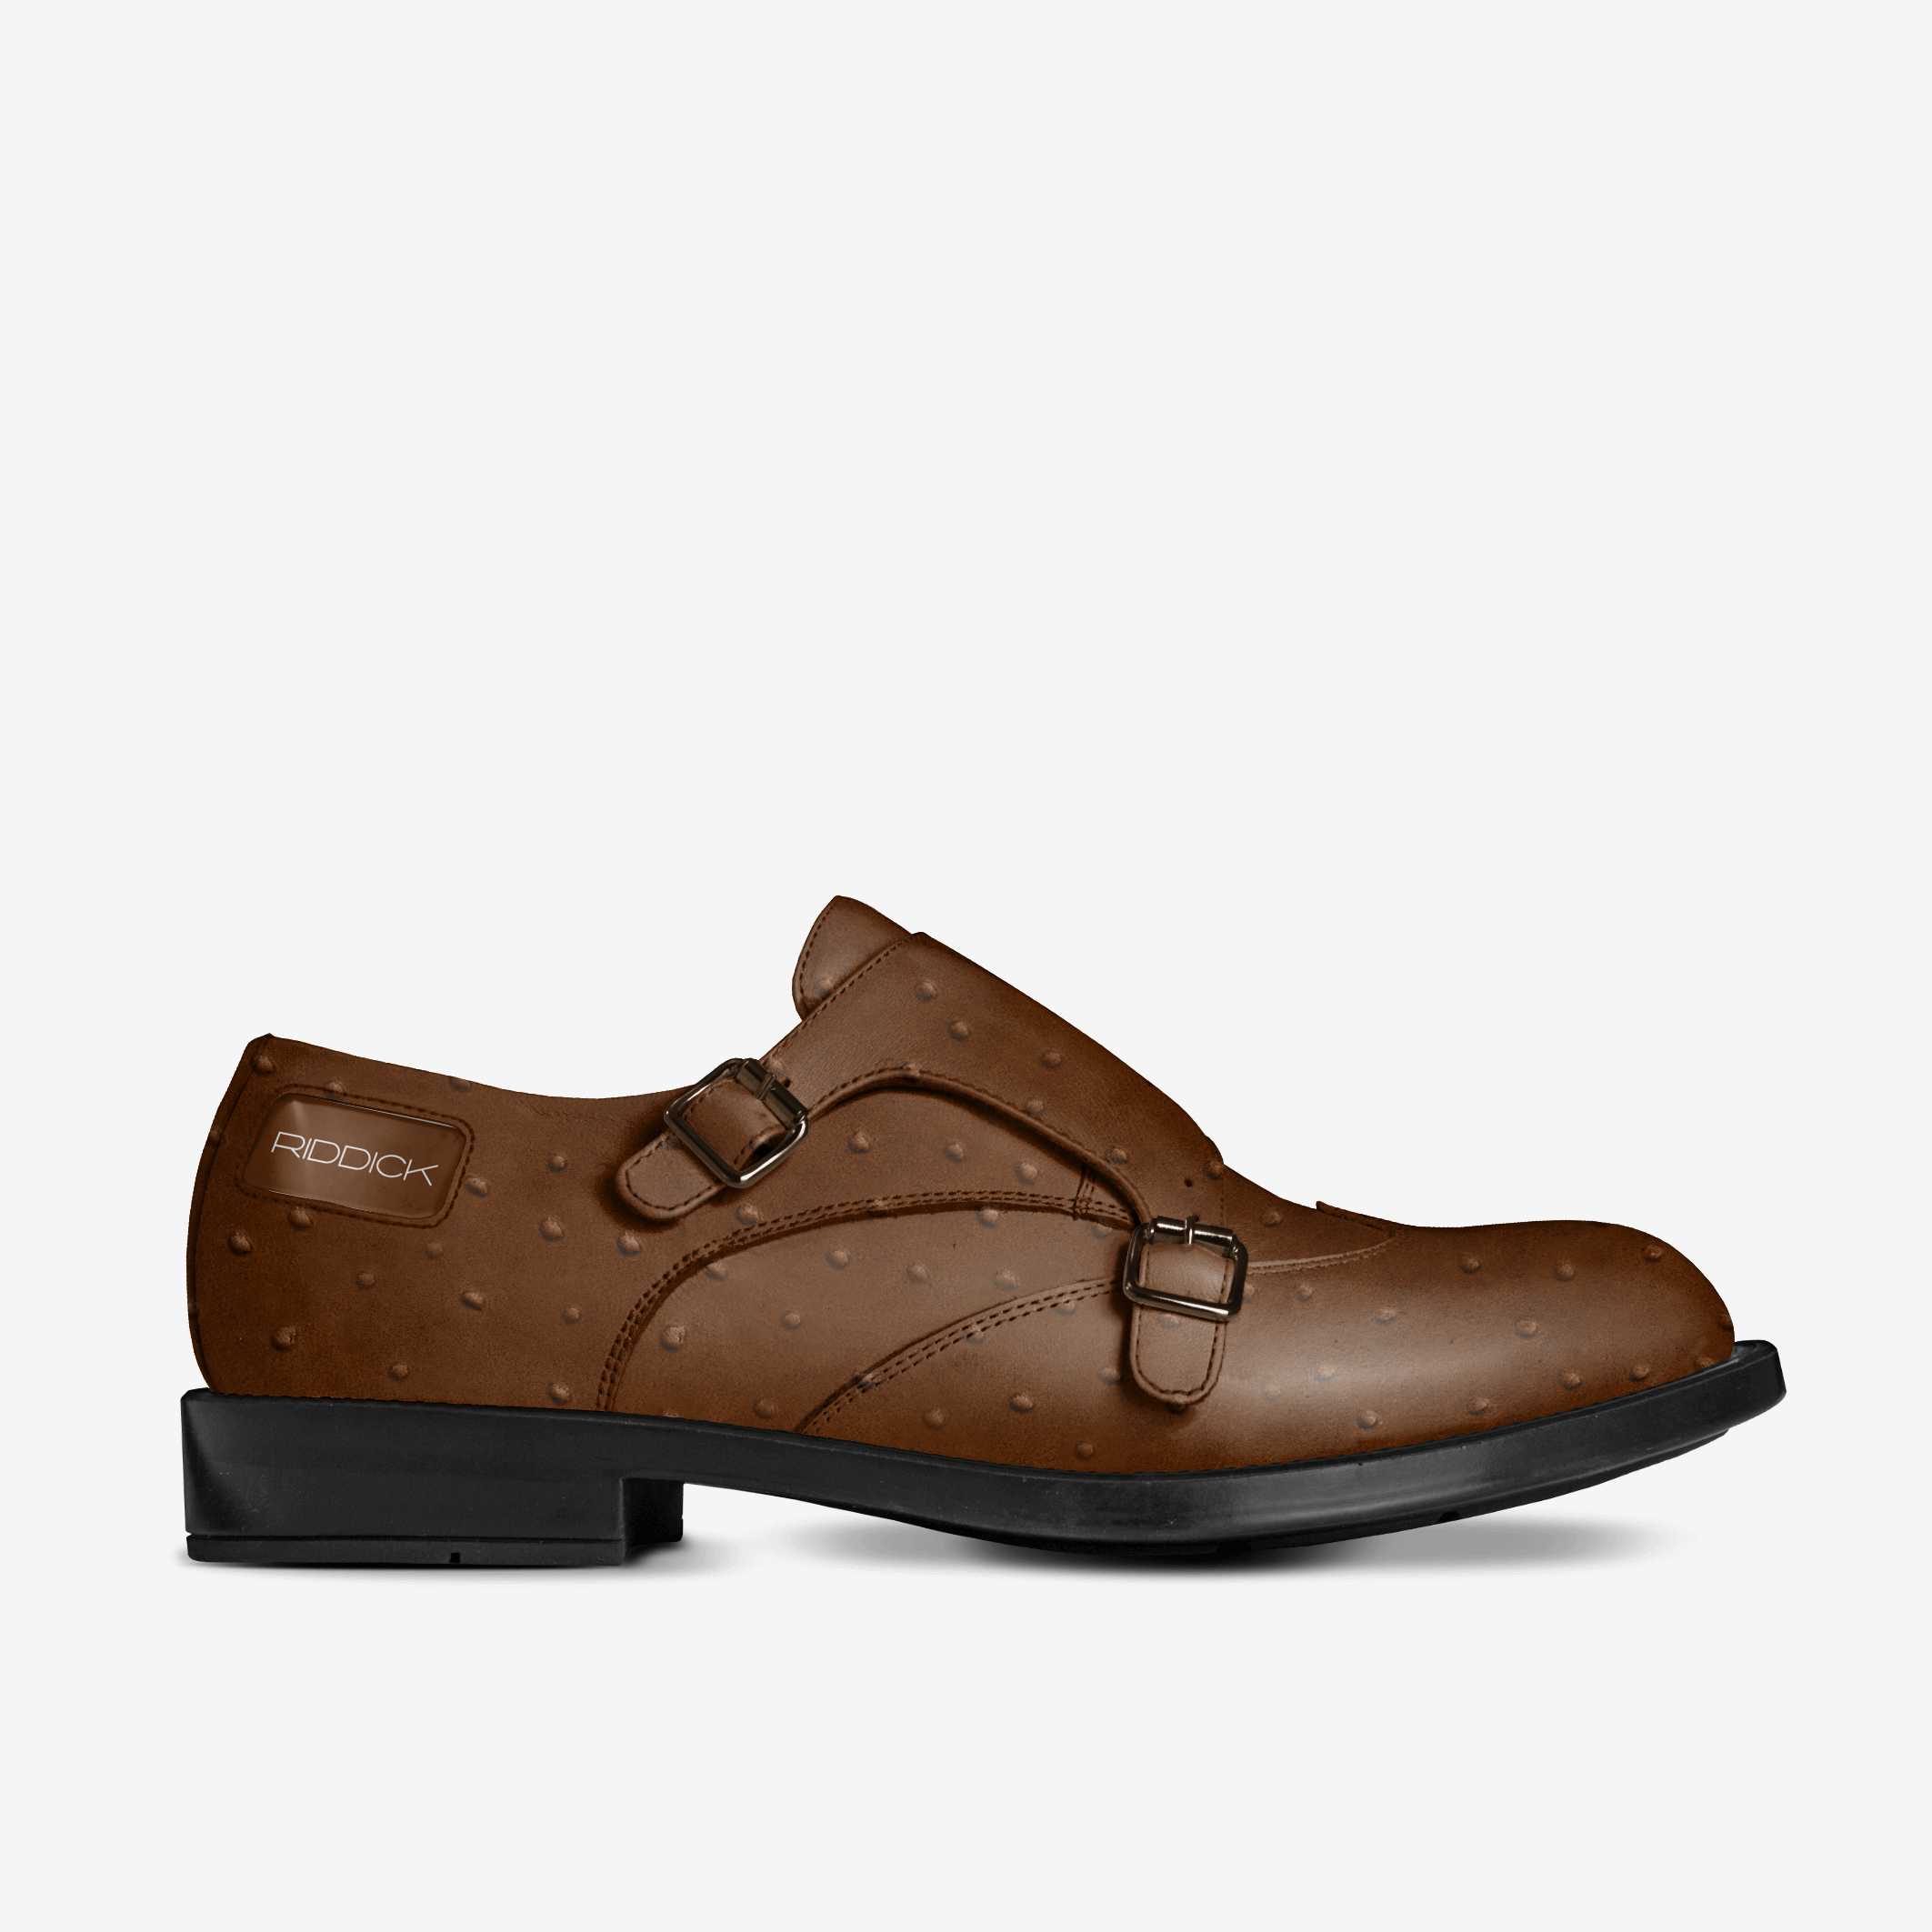 EXEC, STRAPPED (IN SADDLE BROWN) - Riddick Shoes Shoe Riddick Shoes   